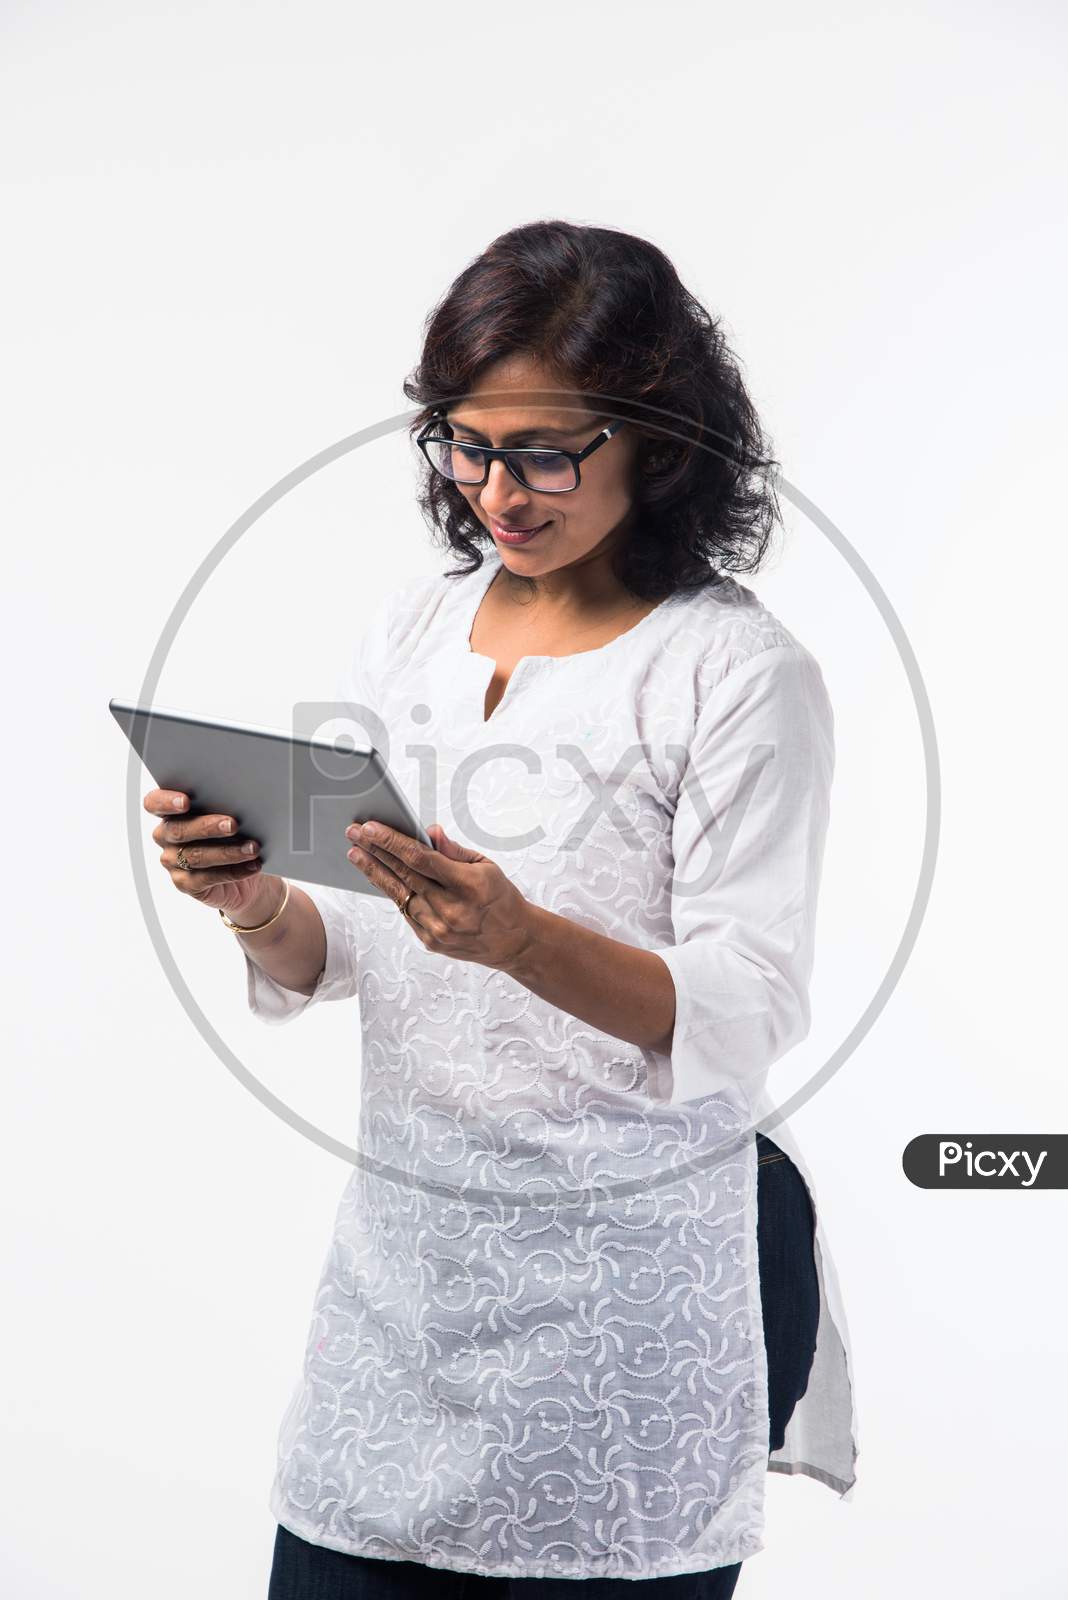 indian lady/women using tablet pc while standing isolated over white background, selective focus